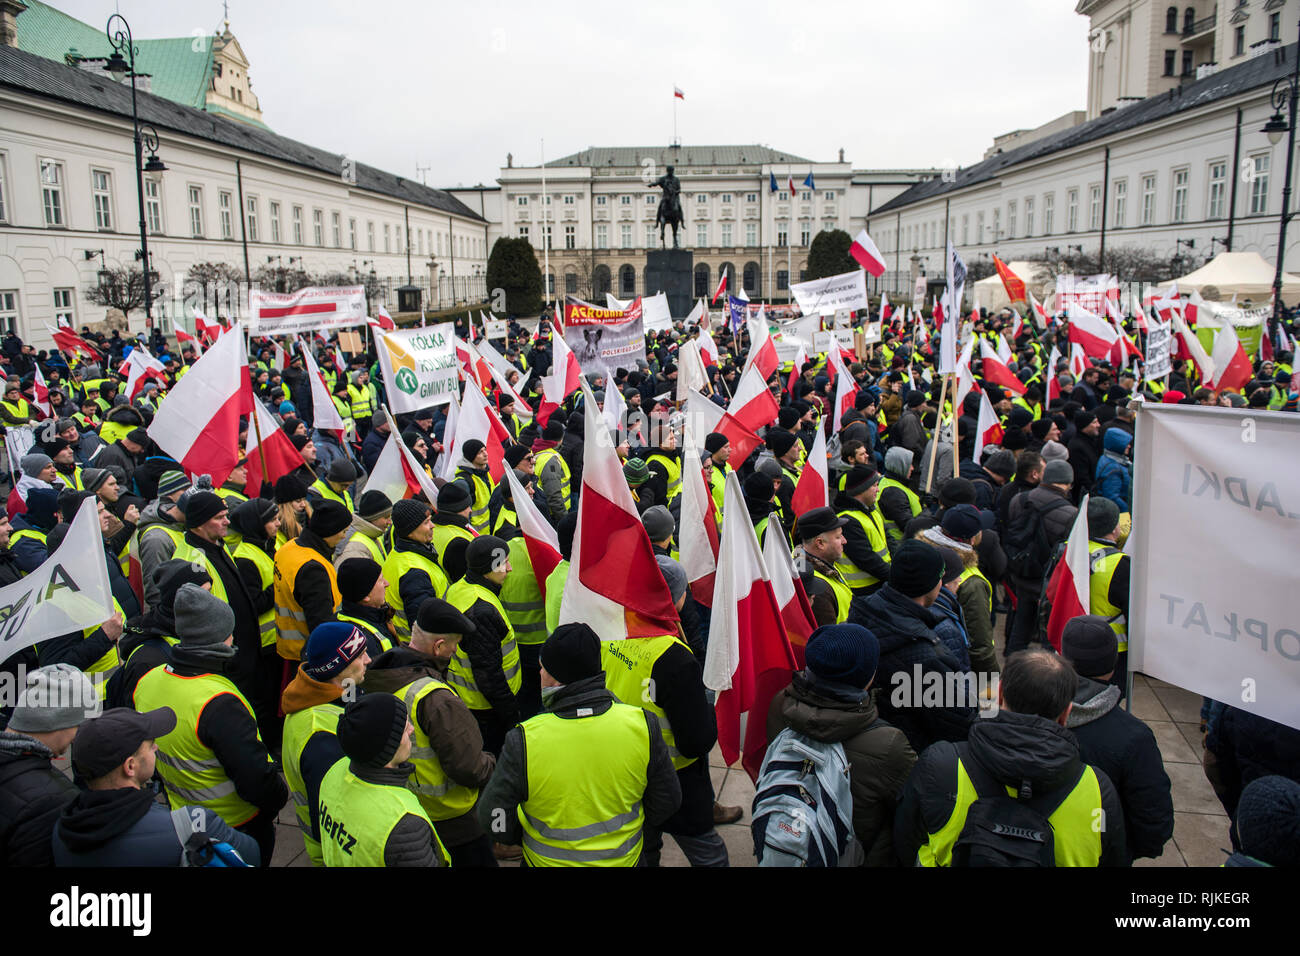 Thousands of farmers are seen holding flags and banners during the protest. Thousands of farmers from across Poland staged a protest outside the presidential palace in Warsaw, demanding repayment of various compensations, control and restrictions over the imports of agricultural products as well as an increase of purchase prices, The demonstration was held by the Agrounia group and had been billed by farmers as the 'Siege of Warsaw.' Farmers took a coffin for the president as a symbol of the death of the polish agriculture. Stock Photo